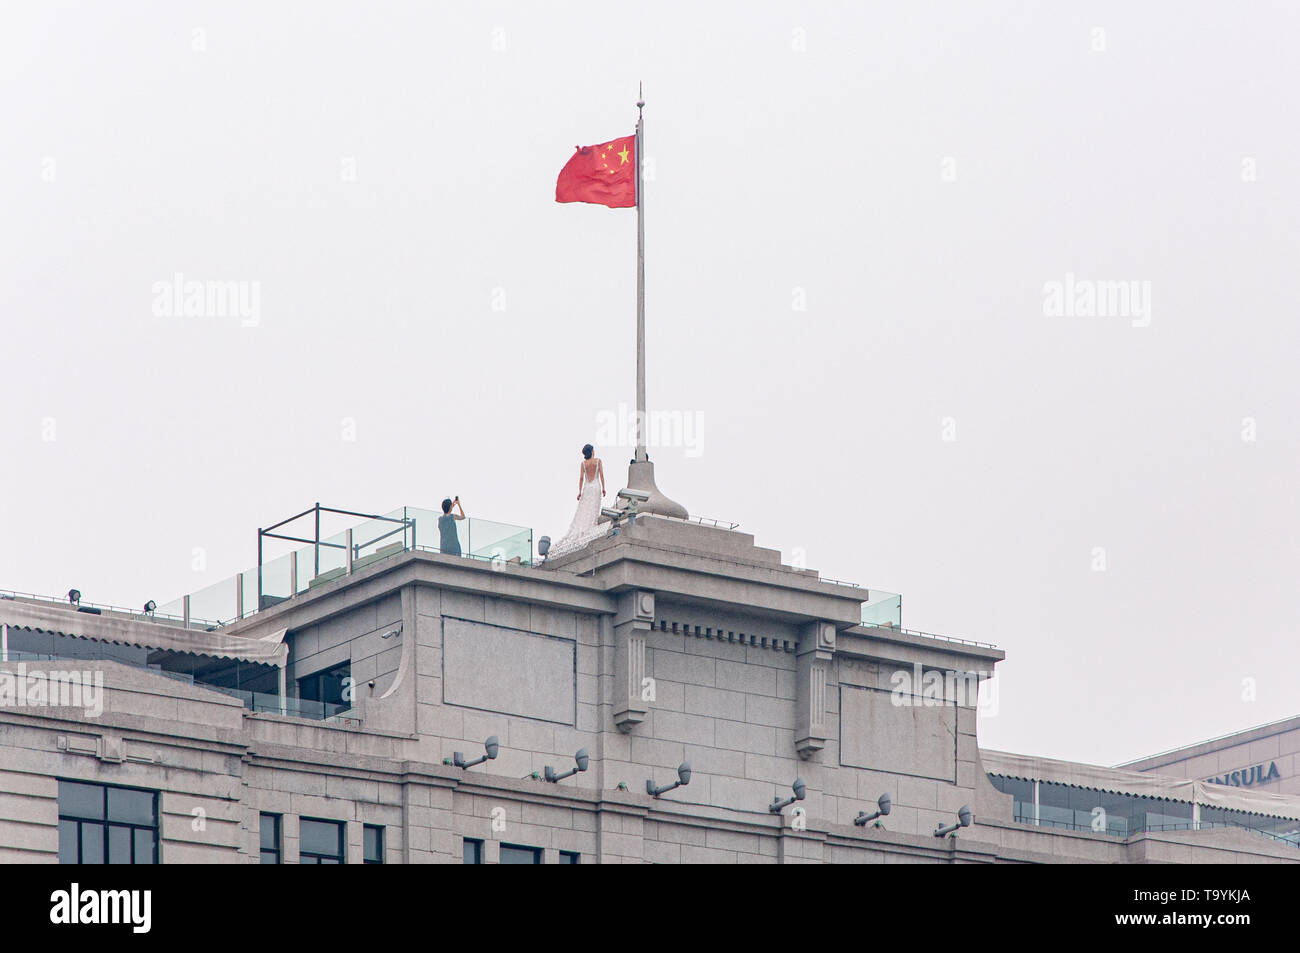 SHANGHAI, CHINA - JUN 2013: Newlyweds make wedding photos on the background of the national flag of China on the roof of the government building in Sh Stock Photo